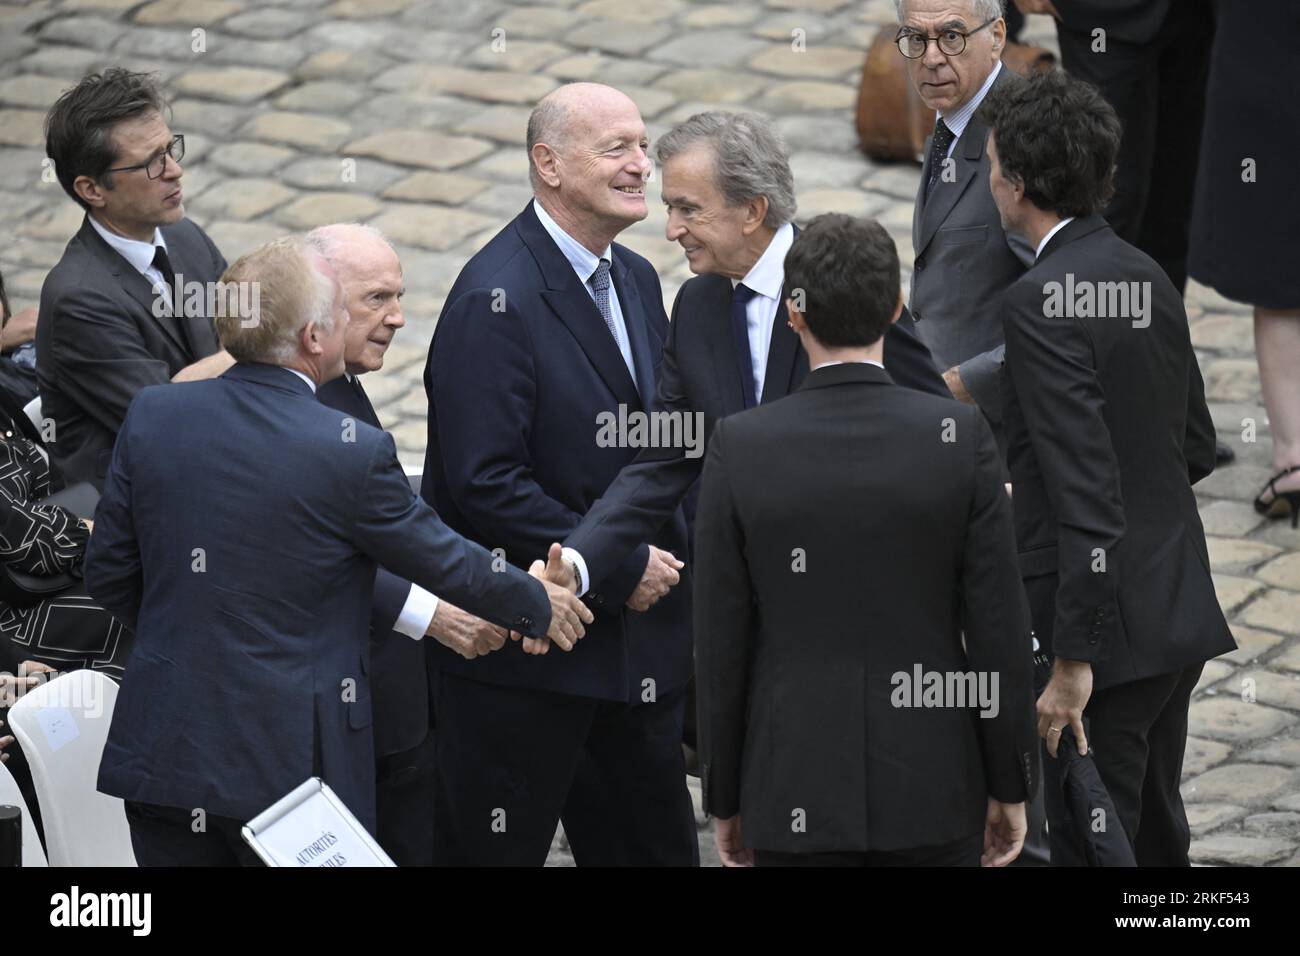 French businessman, chairman and CEO of Kering, Francois-Henri Pinault,  World's top luxury group LVMH head Bernard Arnault and CEO of LVMH Holding  Company, Antoine Arnault during Jean-Louis Georgelin's national tribute  held at